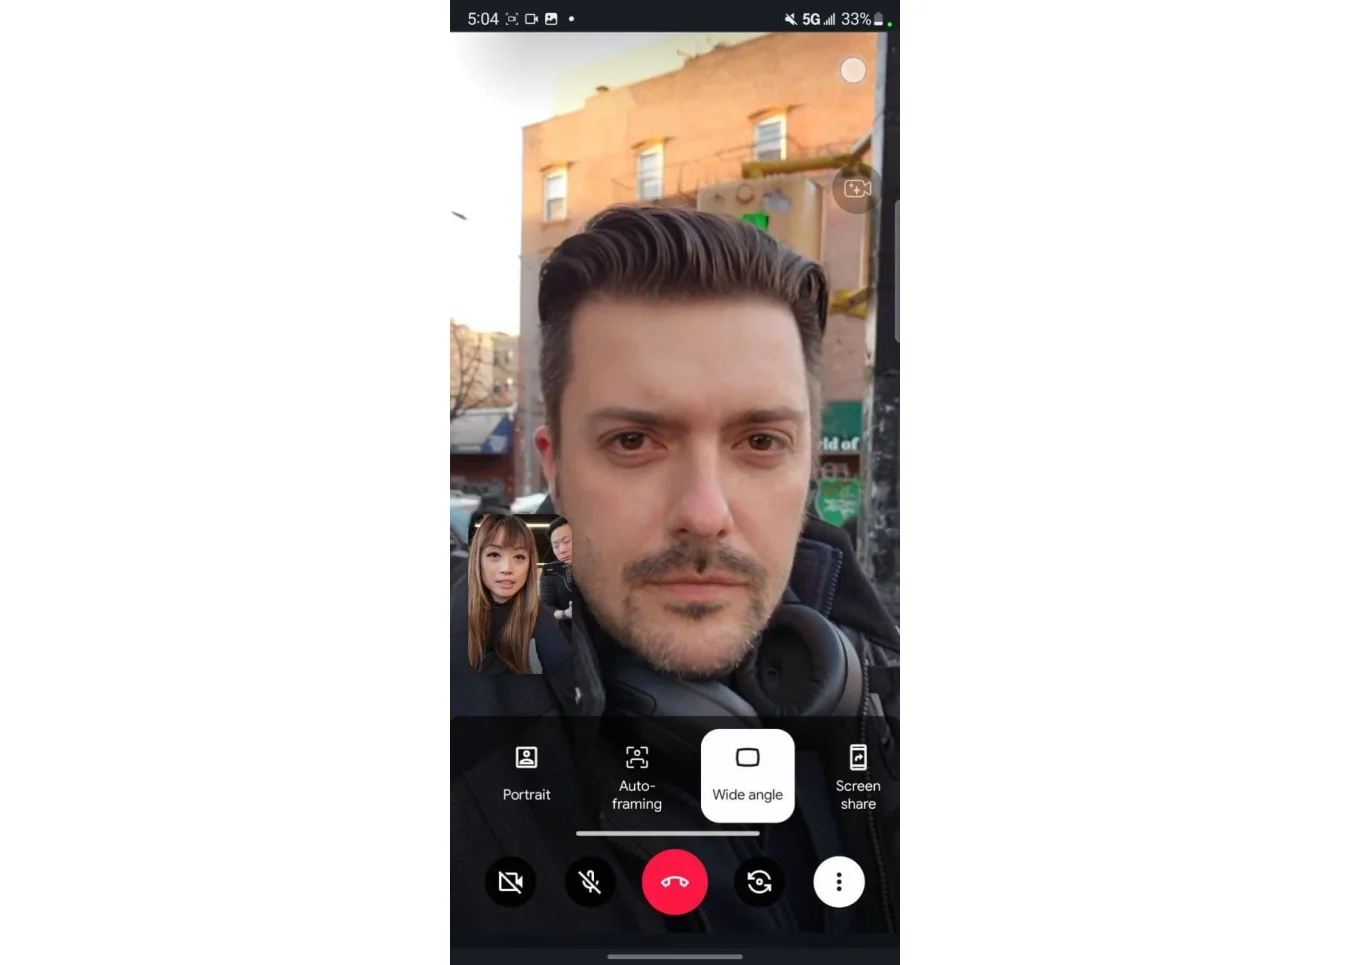 A screenshot of a Google Duo video call on the Galaxy S22 Ultra. A man's face fills the screen, while a woman's face is in a small box to the bottom left. Below their faces is a row of options including 